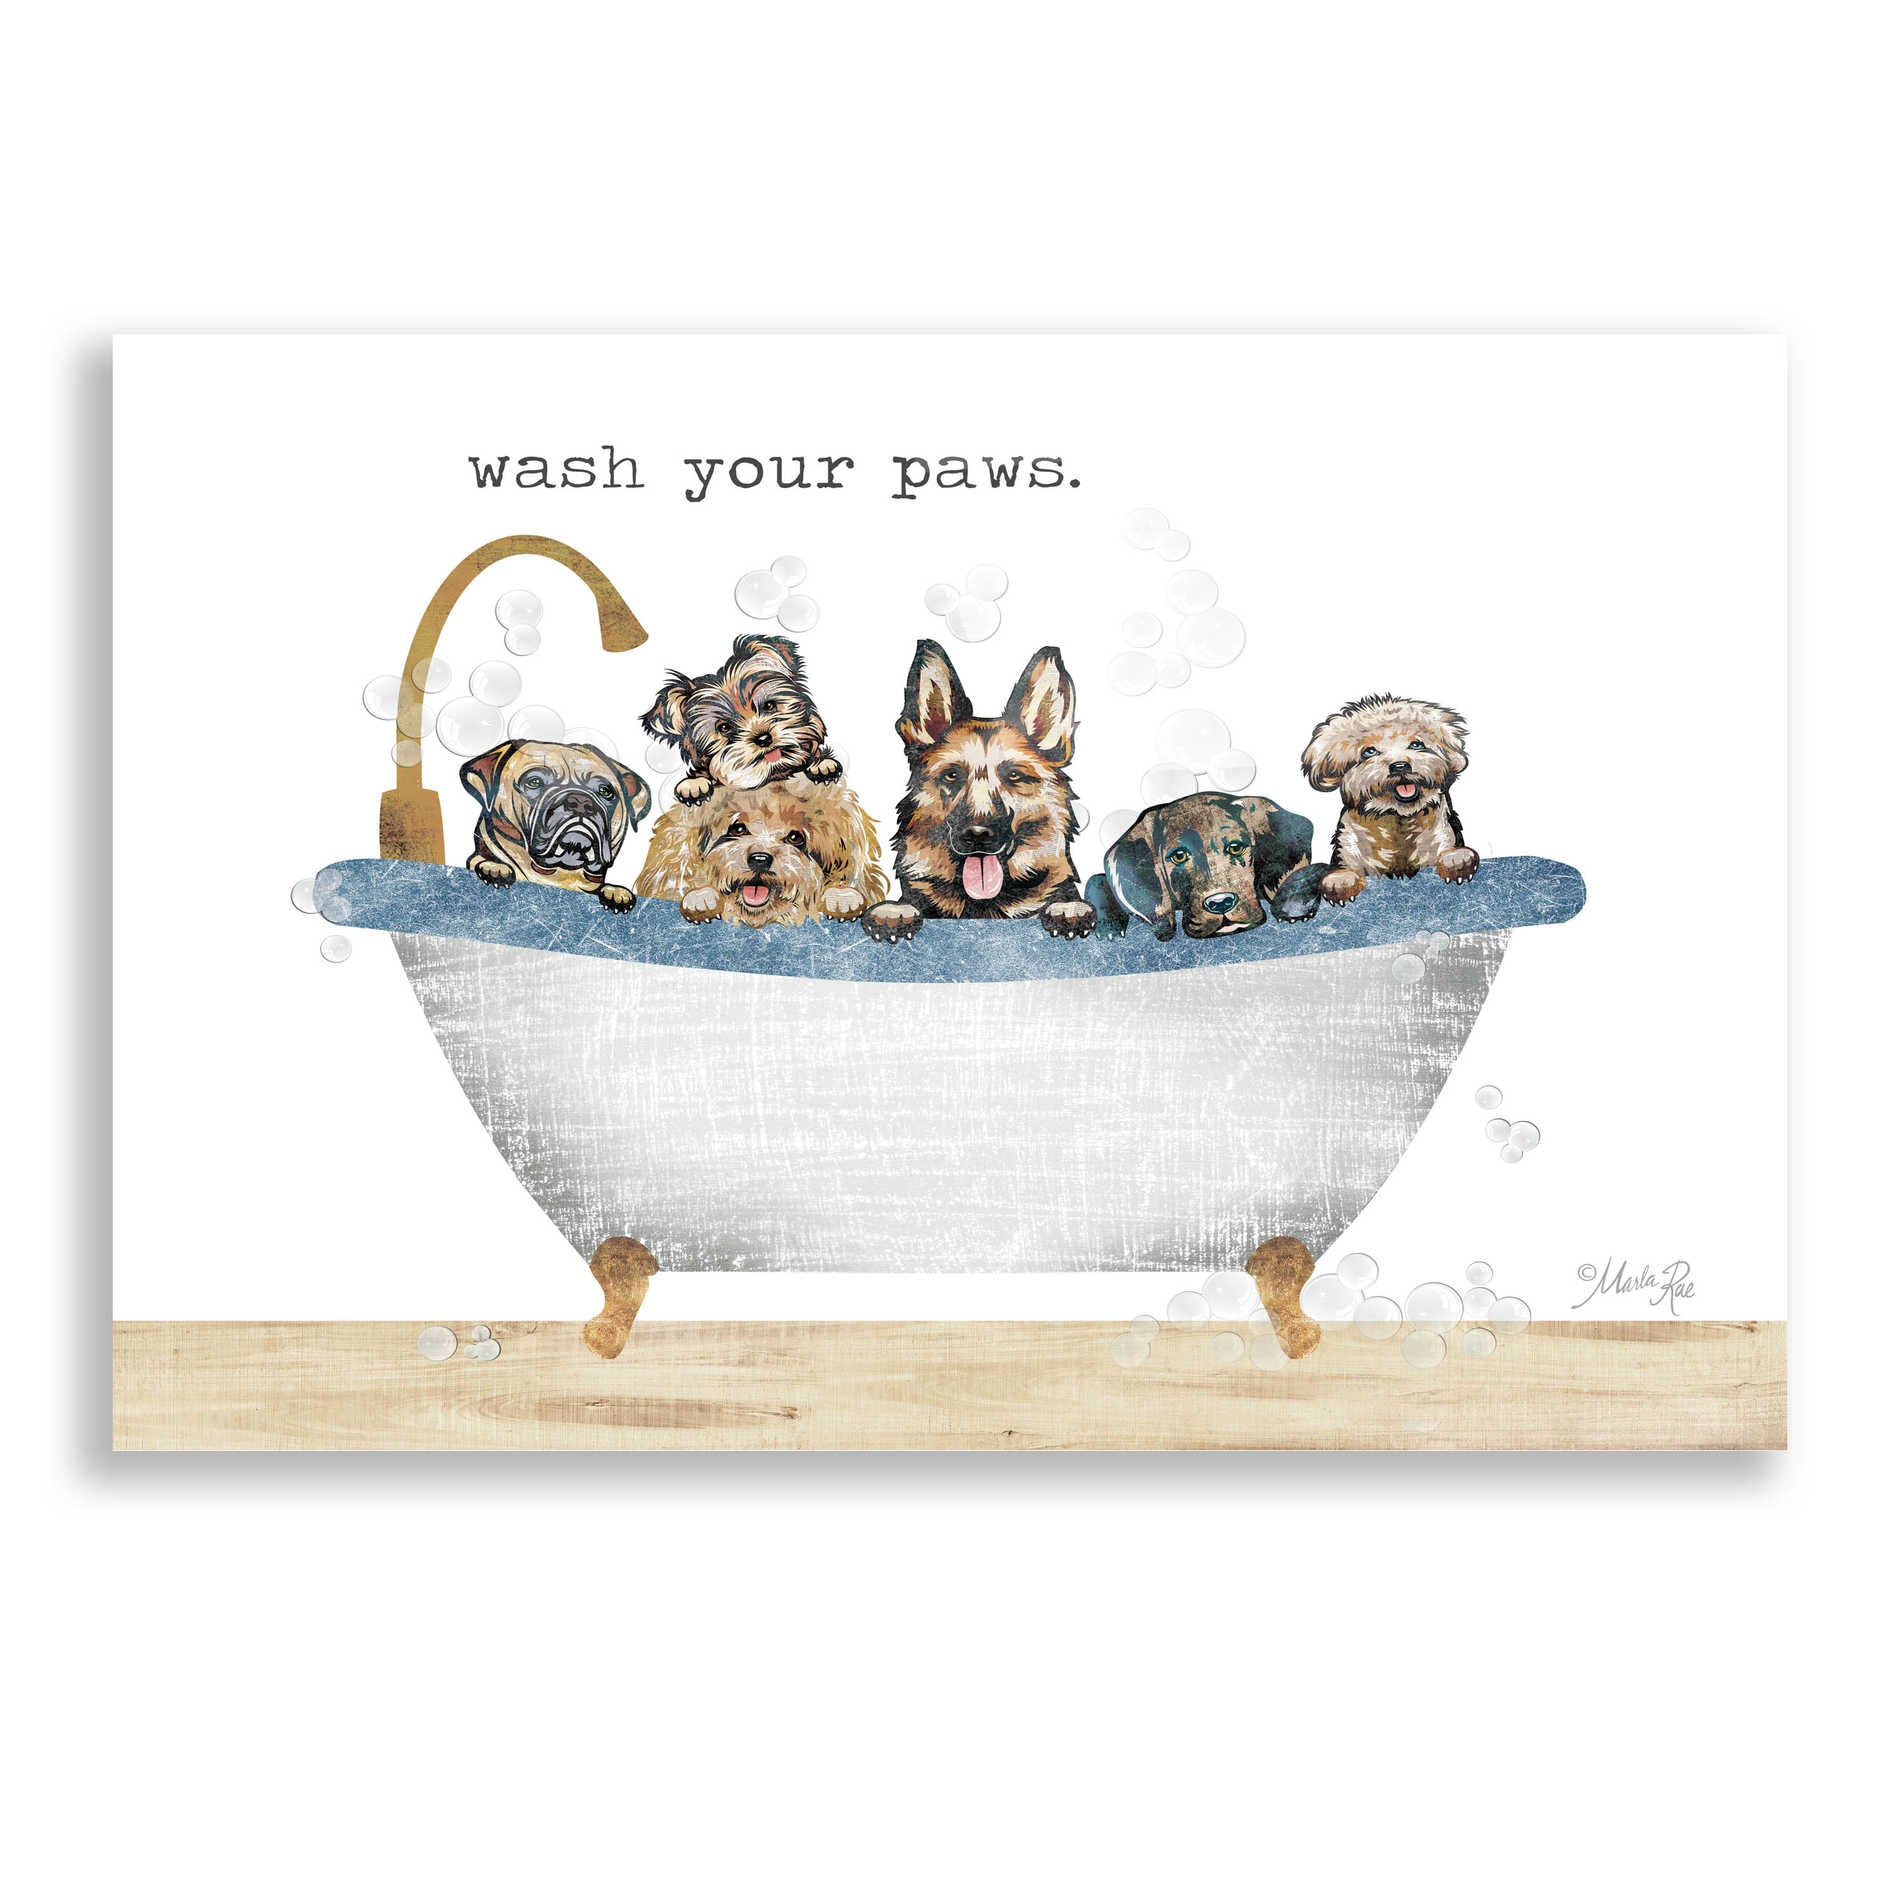 Epic Art 'Wash Your Paws' by Marla Rae, Acrylic Glass Wall Art,24x16